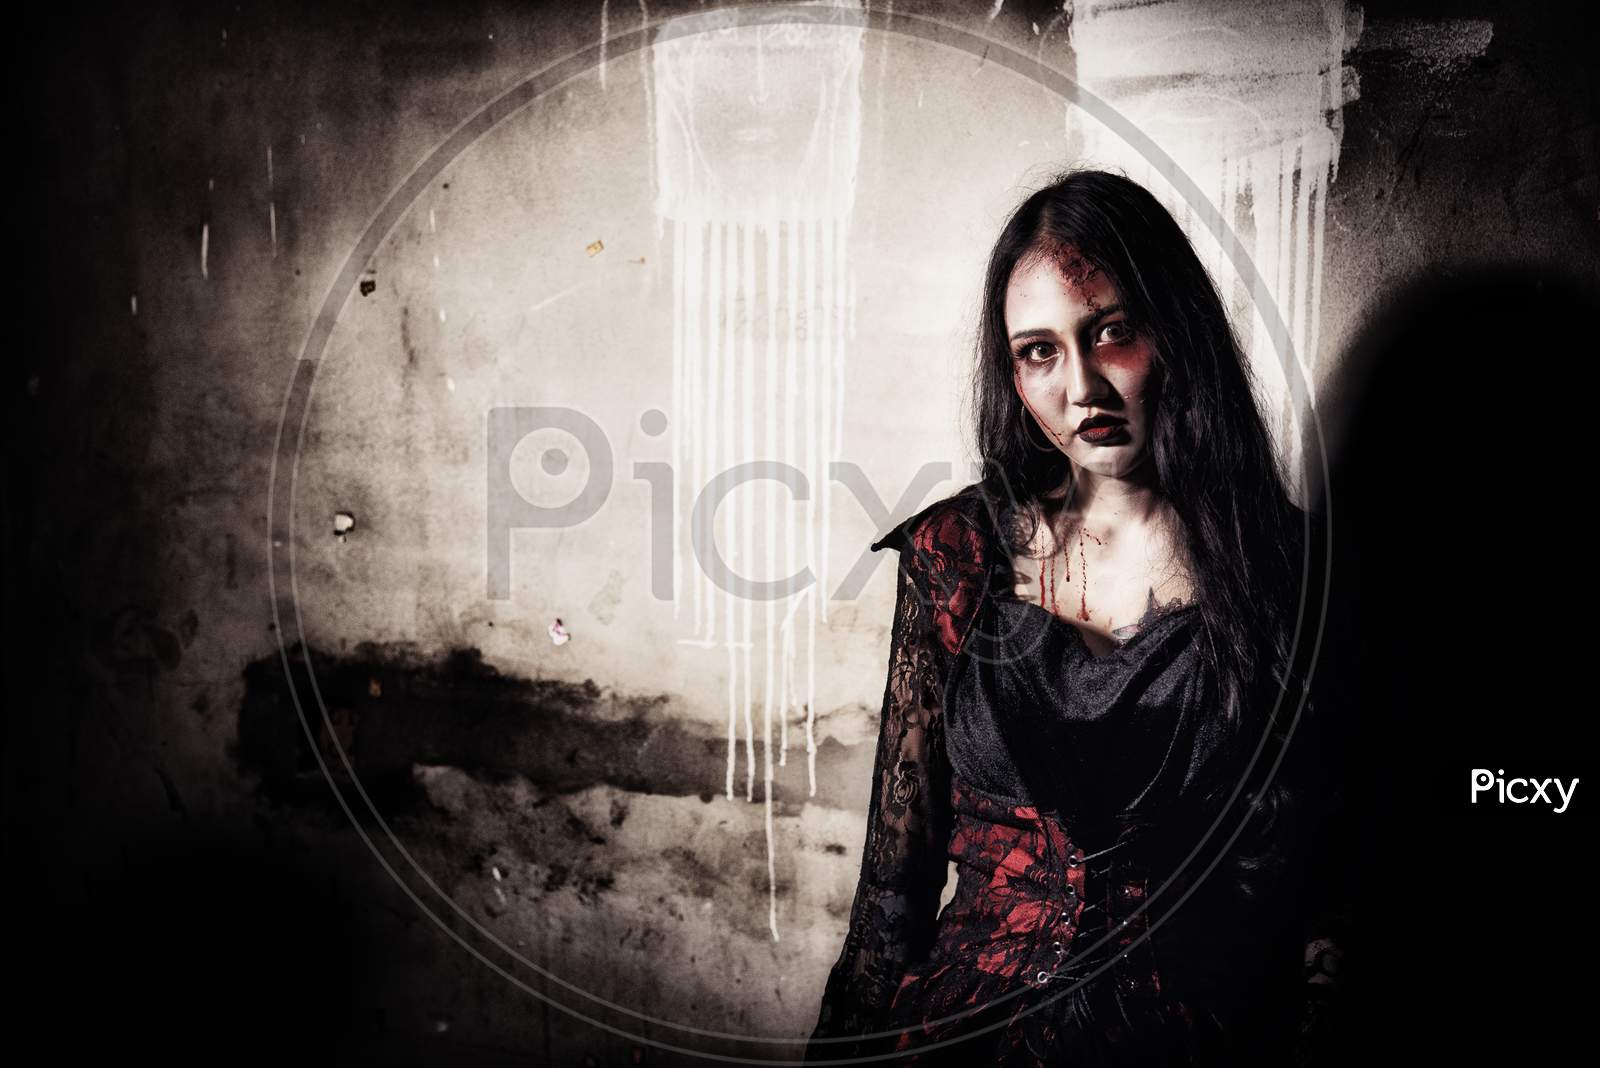 Female Zombie Corpse Standing In Front Of Grunge Wall In Abandoned House. Horror And Ghost Concept. Halloween Day Festival And Scary Movie Theme. Haunted House Theme. Dark Tone Film